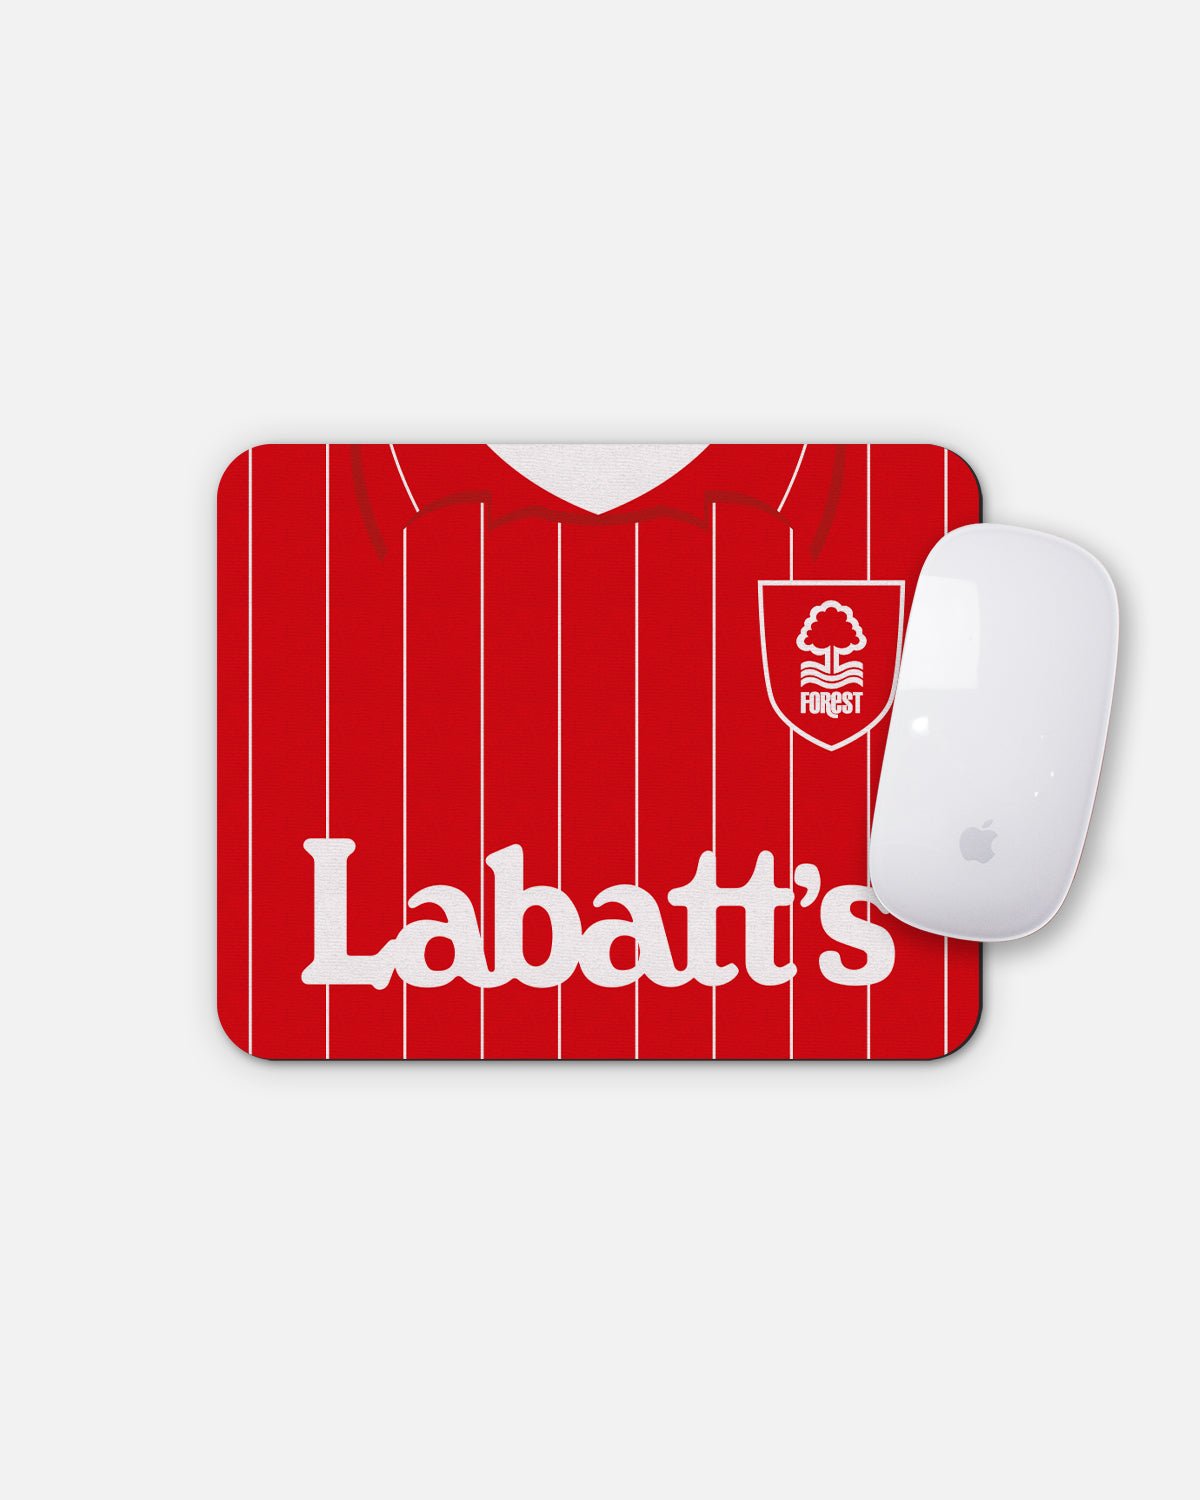 NFFC 1993 Home Mouse Mat - Nottingham Forest FC